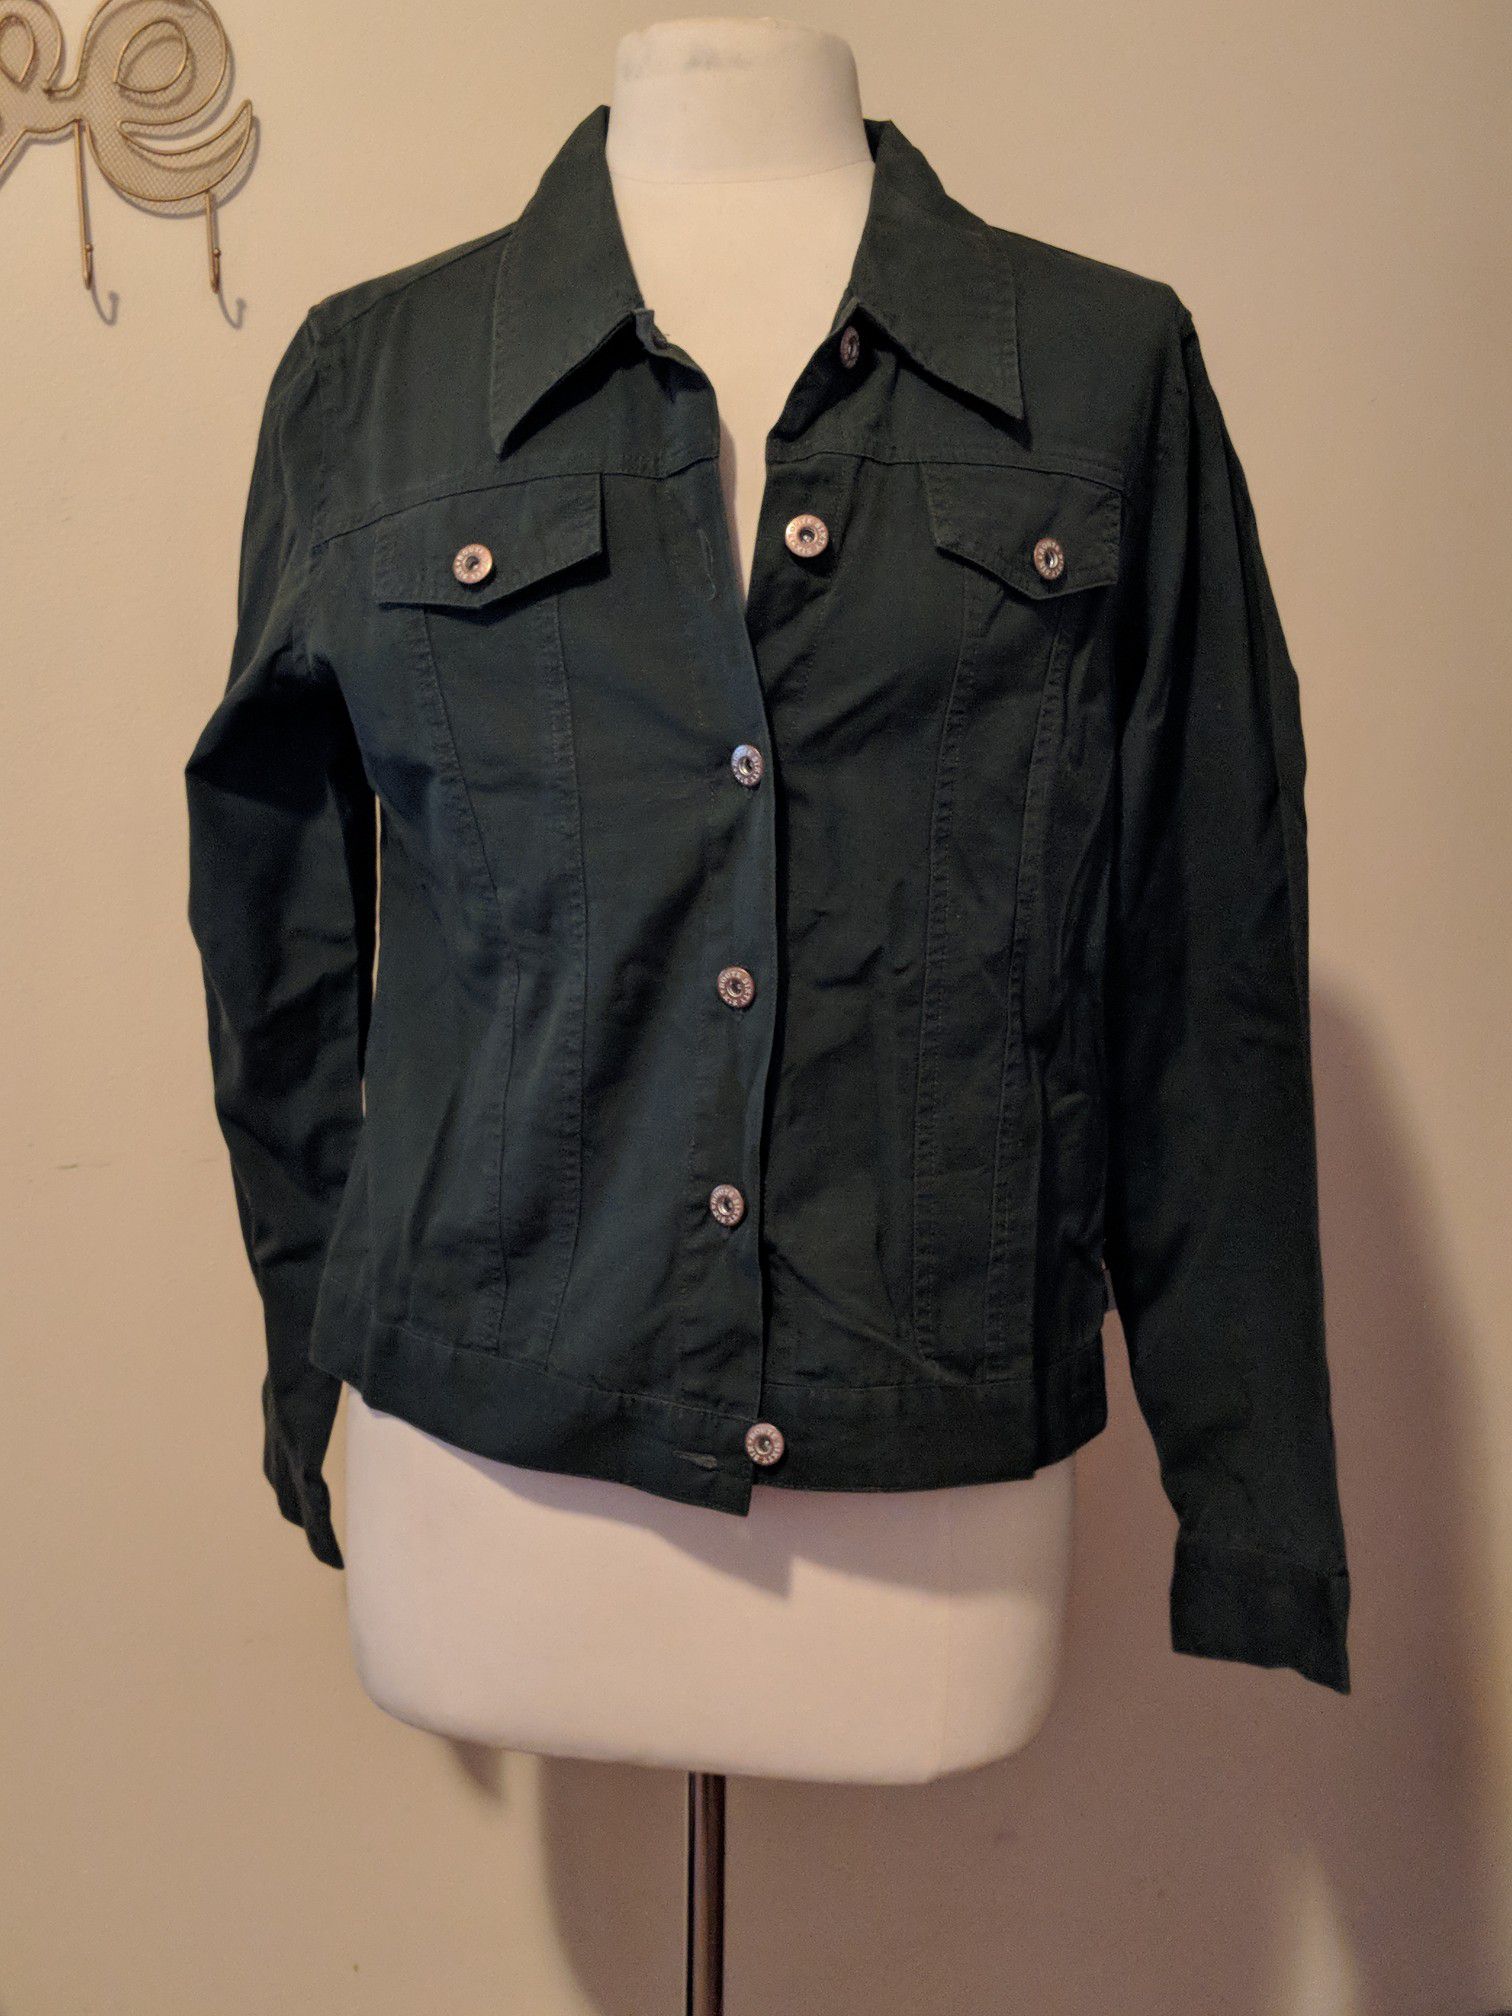 Casual jacket by route 66 size medium